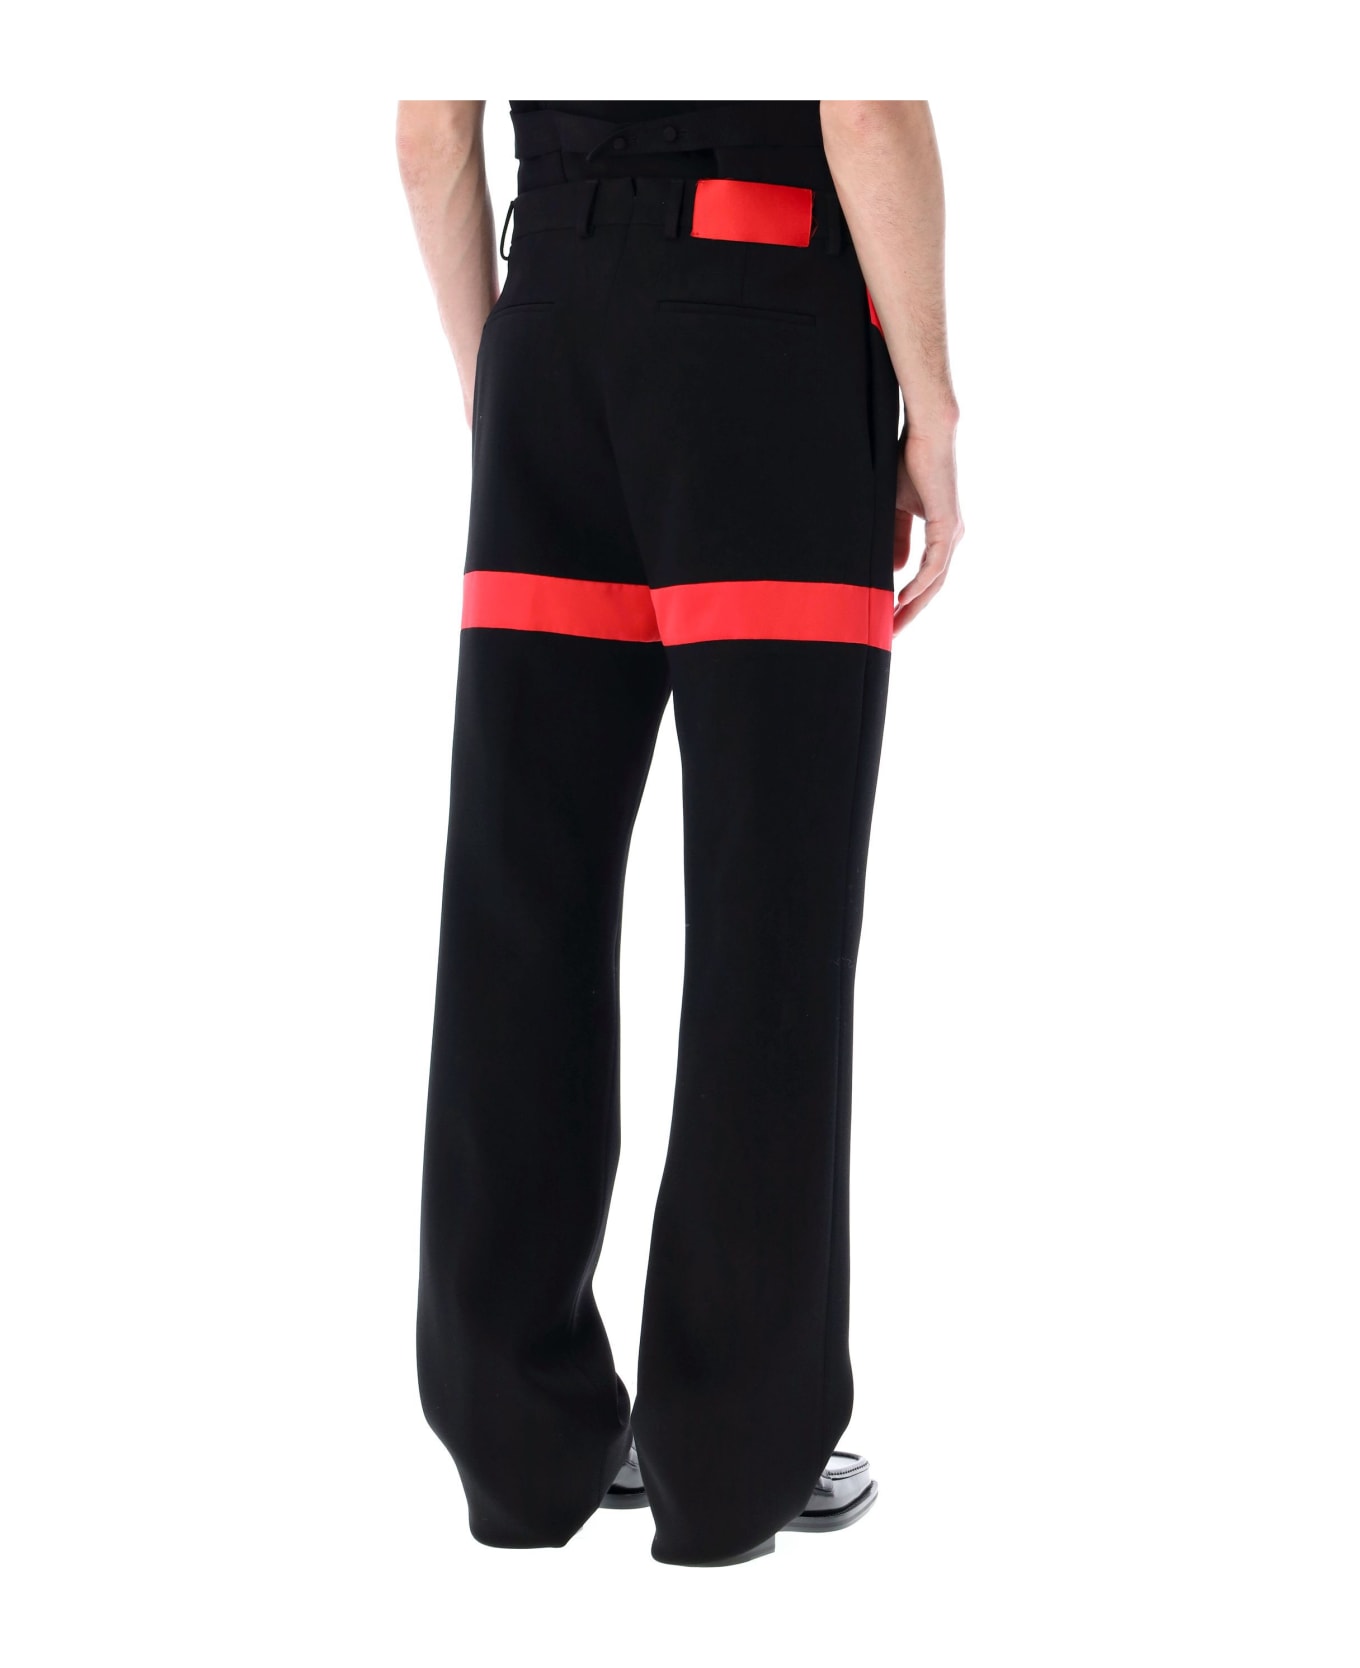 Ferragamo Tailored Pants With Inlays - BLACK RED ボトムス